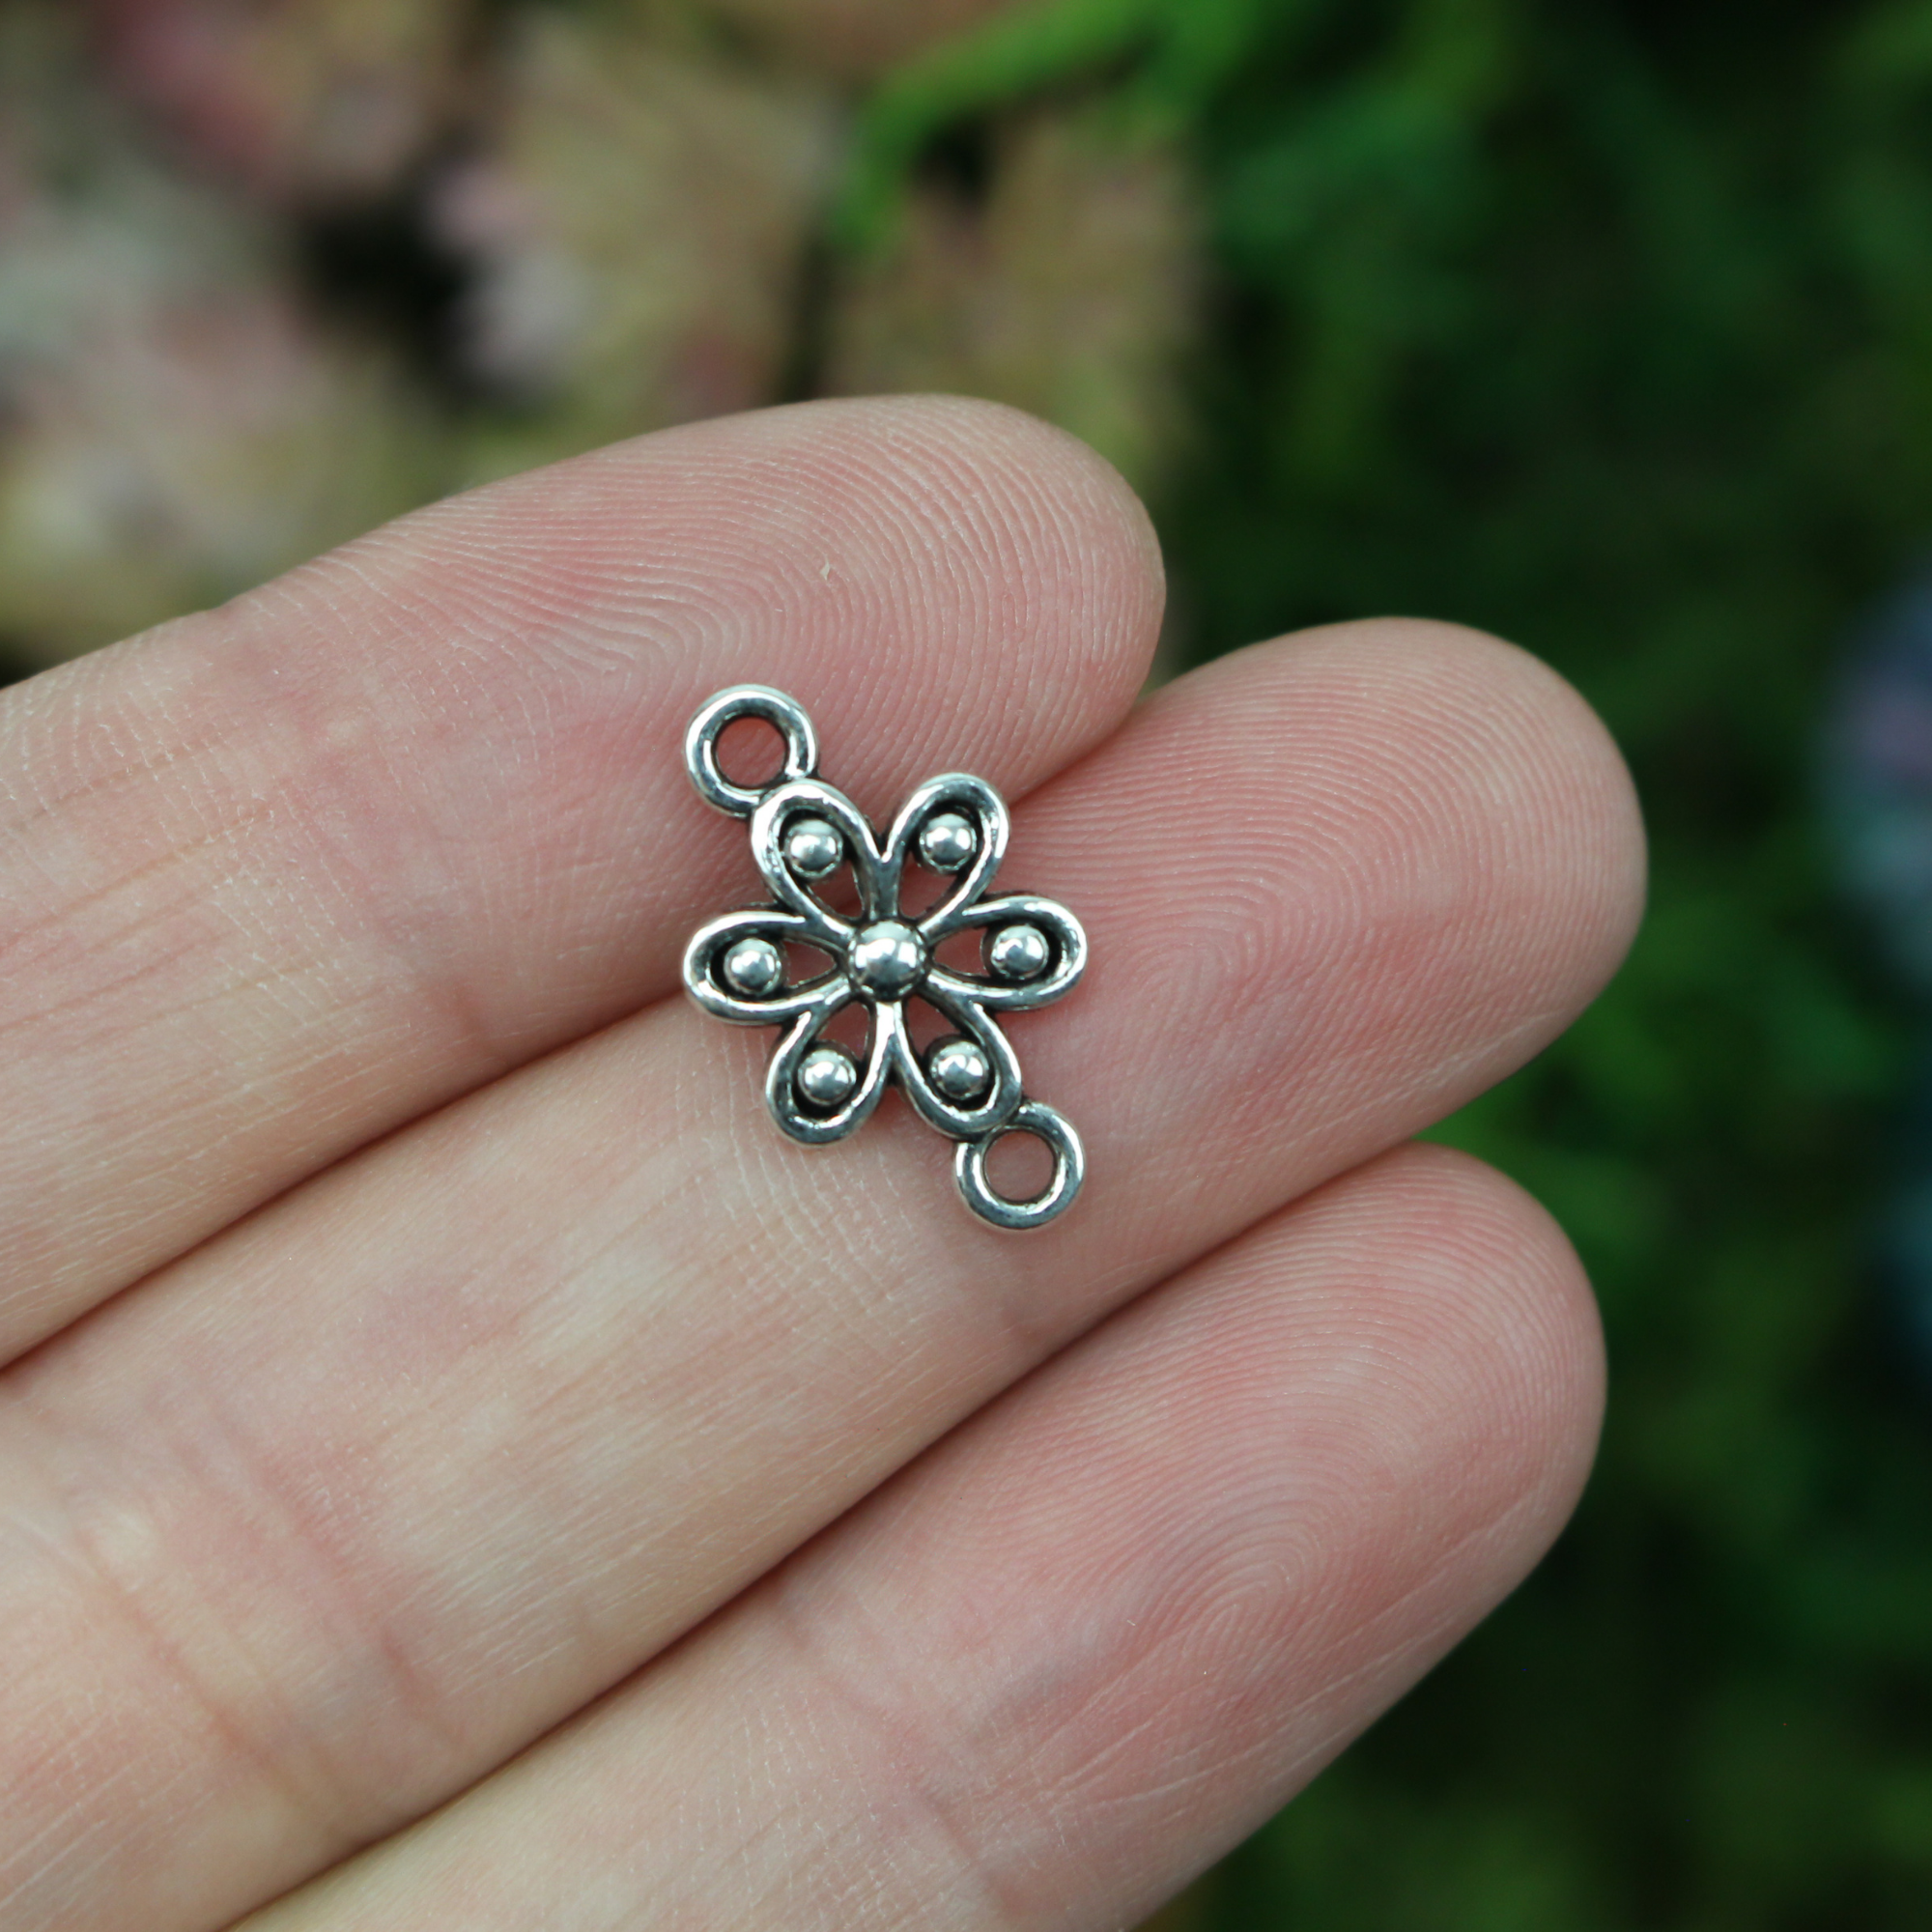 Daisy flower connector links in an antique silver tone color, 17mm long